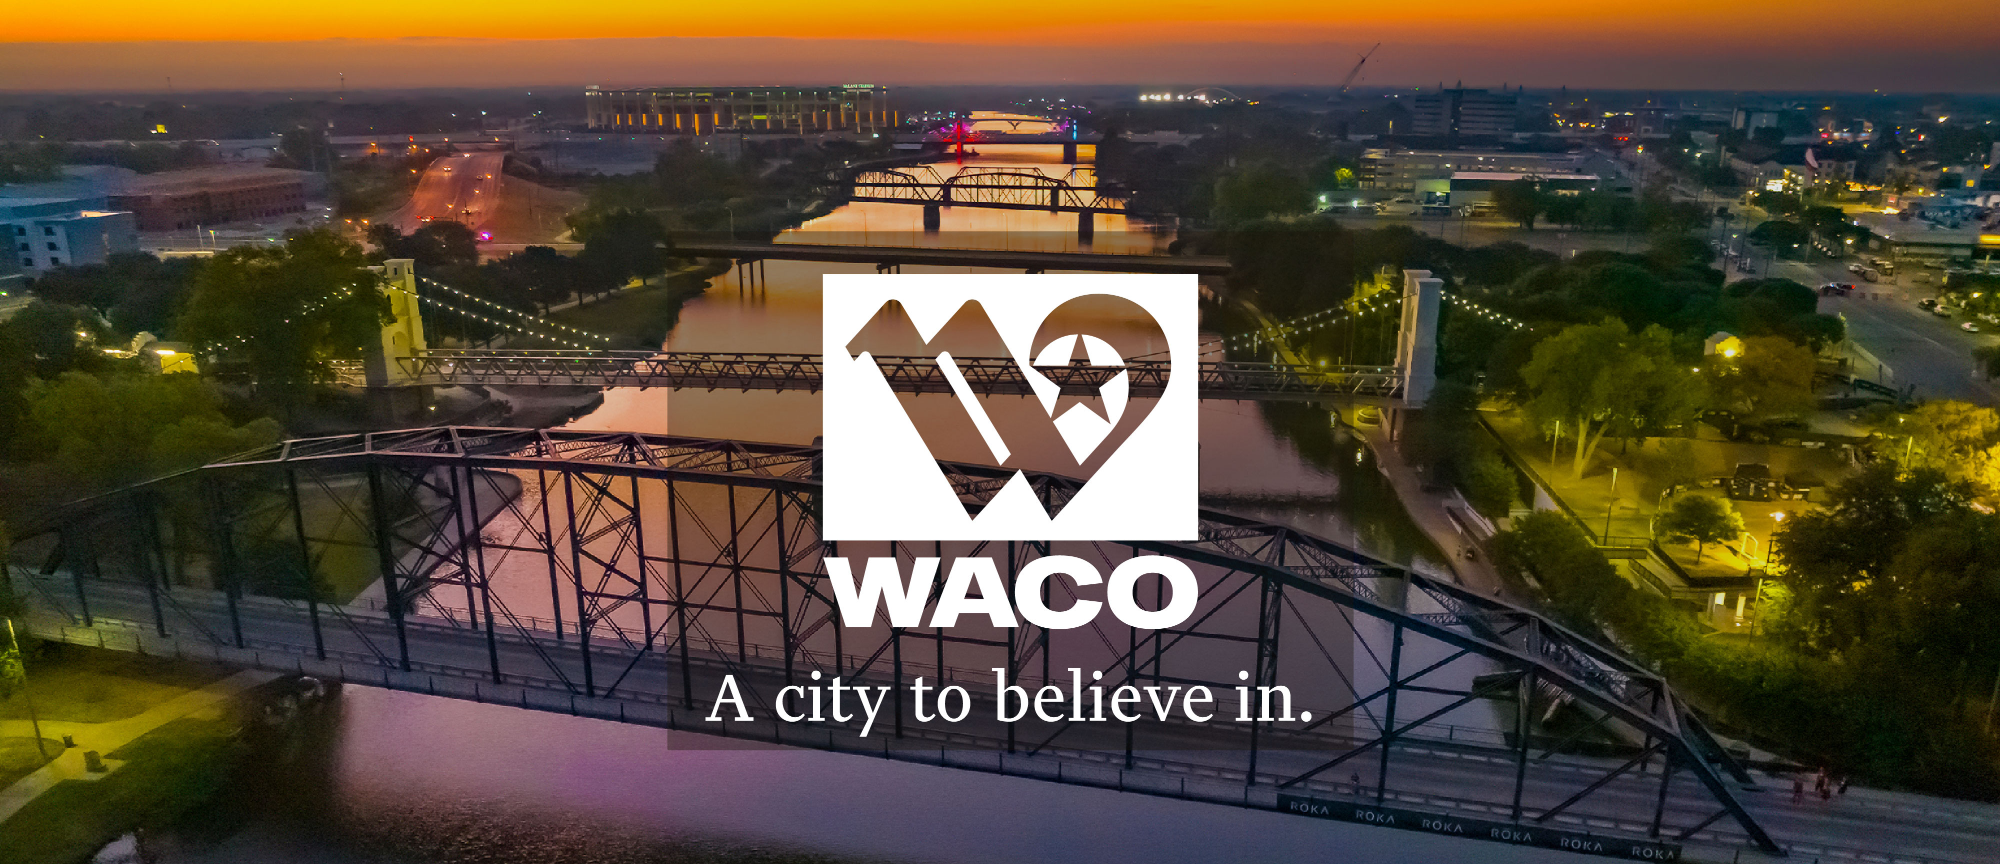 Morning view of the bridges over the Brazos River in downtown Waco